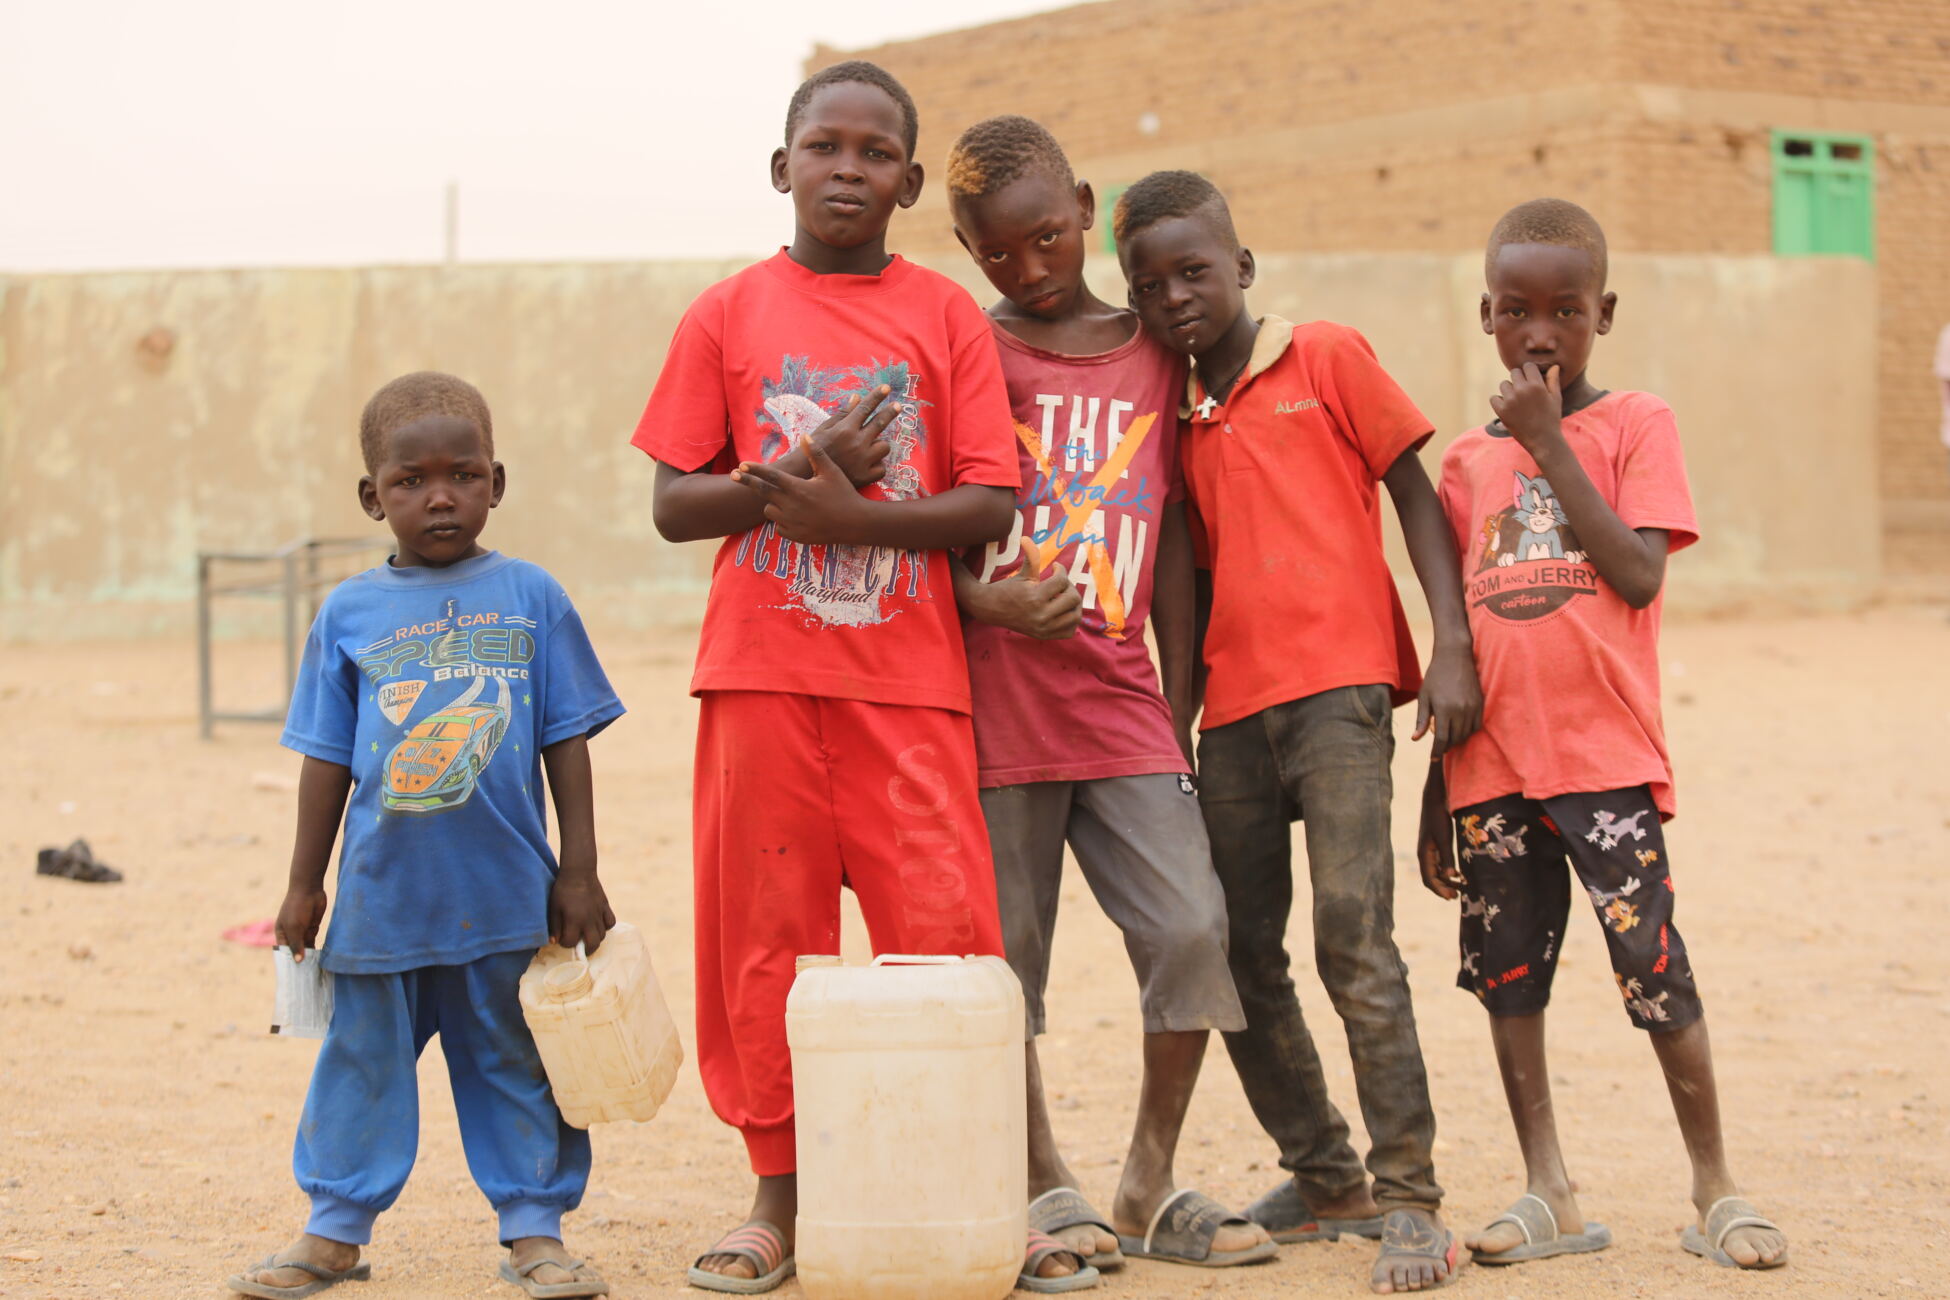 A group of displaced children stand together in Atbara, Sudan.